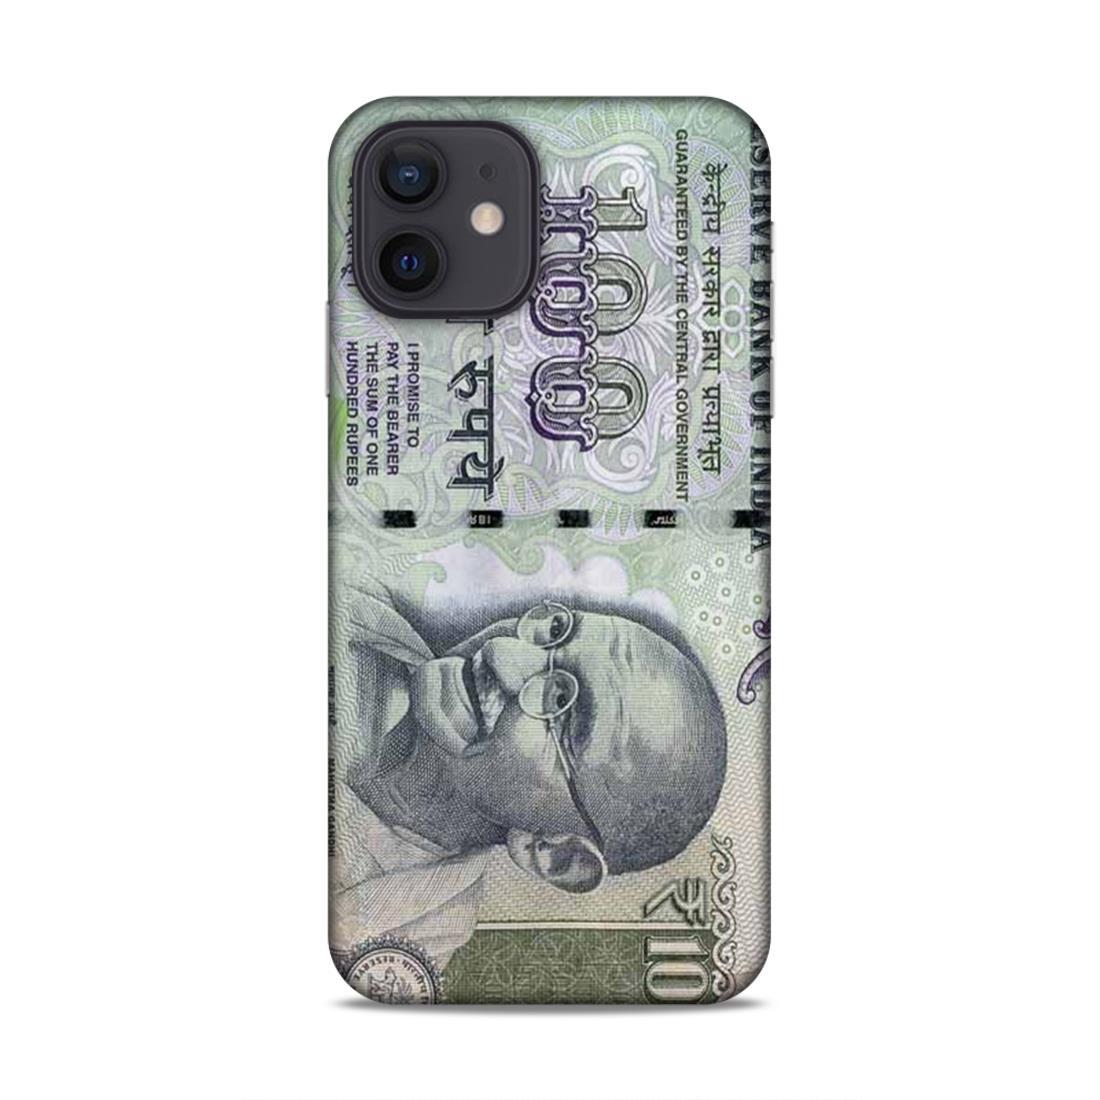 Rs 100 Currency Note iPhone 12 Phone Cover Case